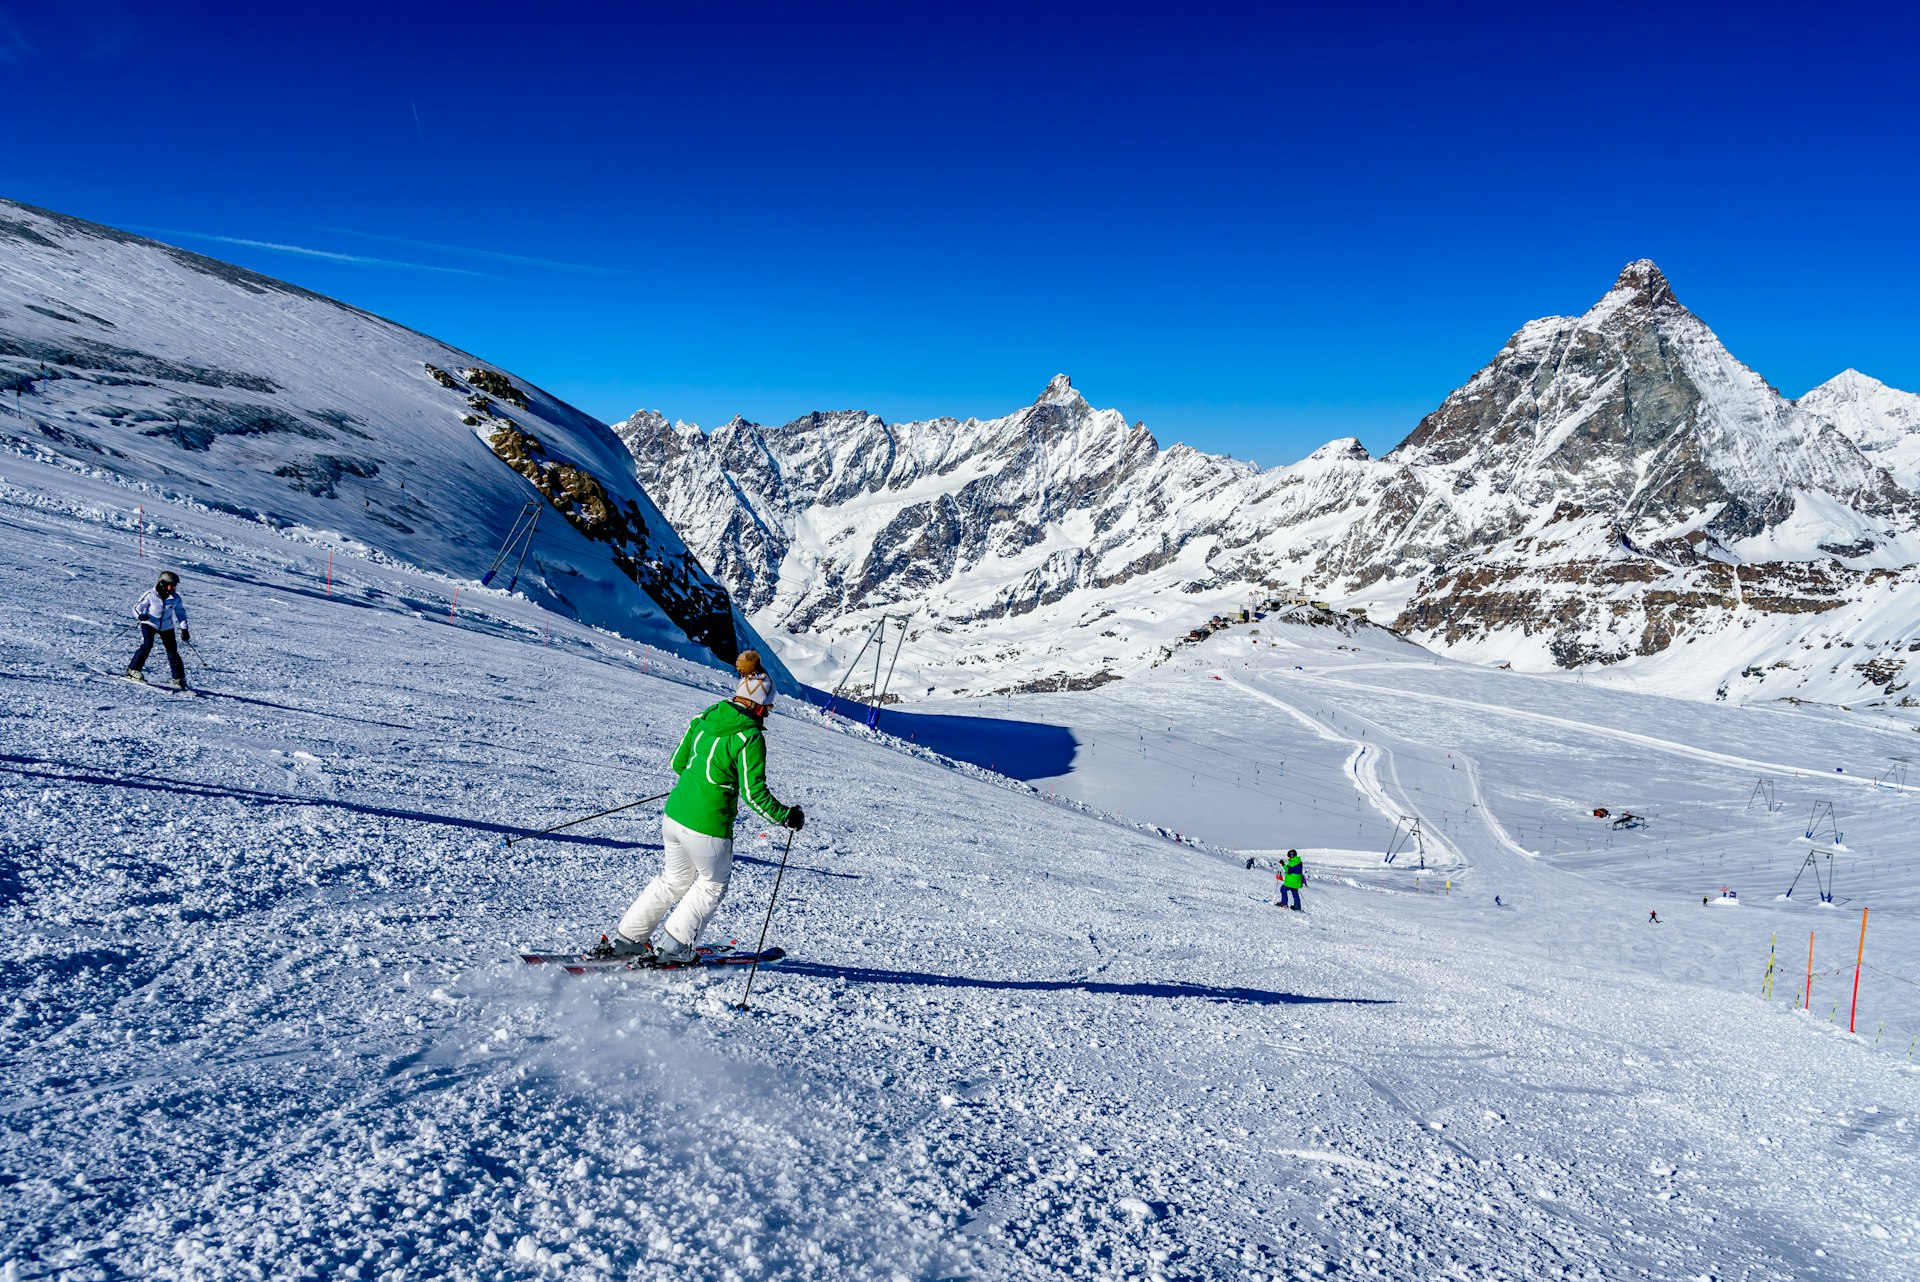 A skier on a trail at a resort in Breuil-Cervinia, Italy, Alps